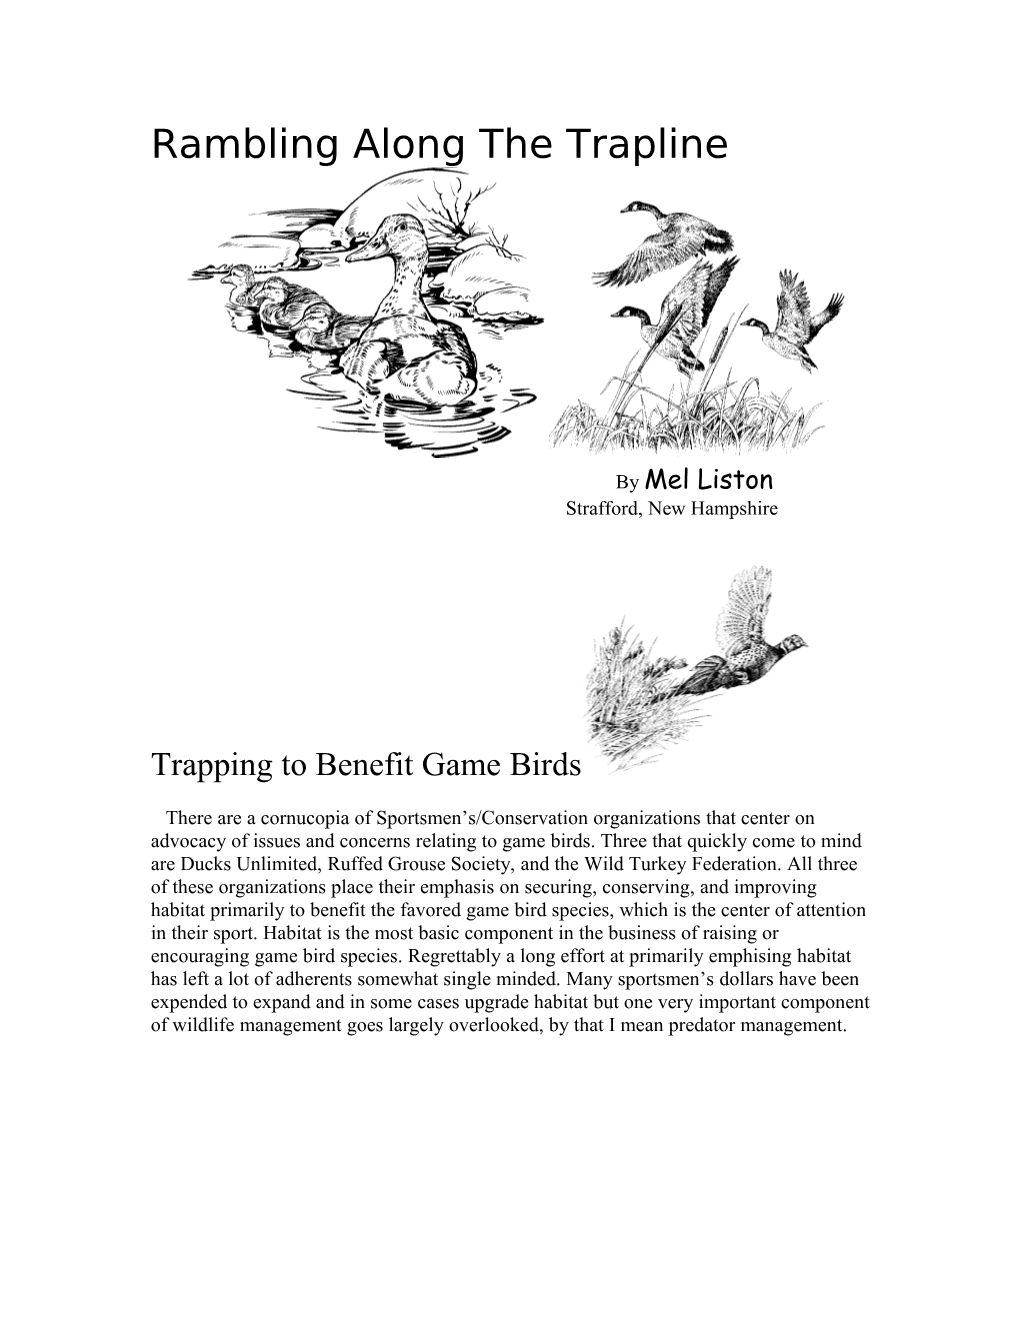 Trapping to Benefit Game Birds